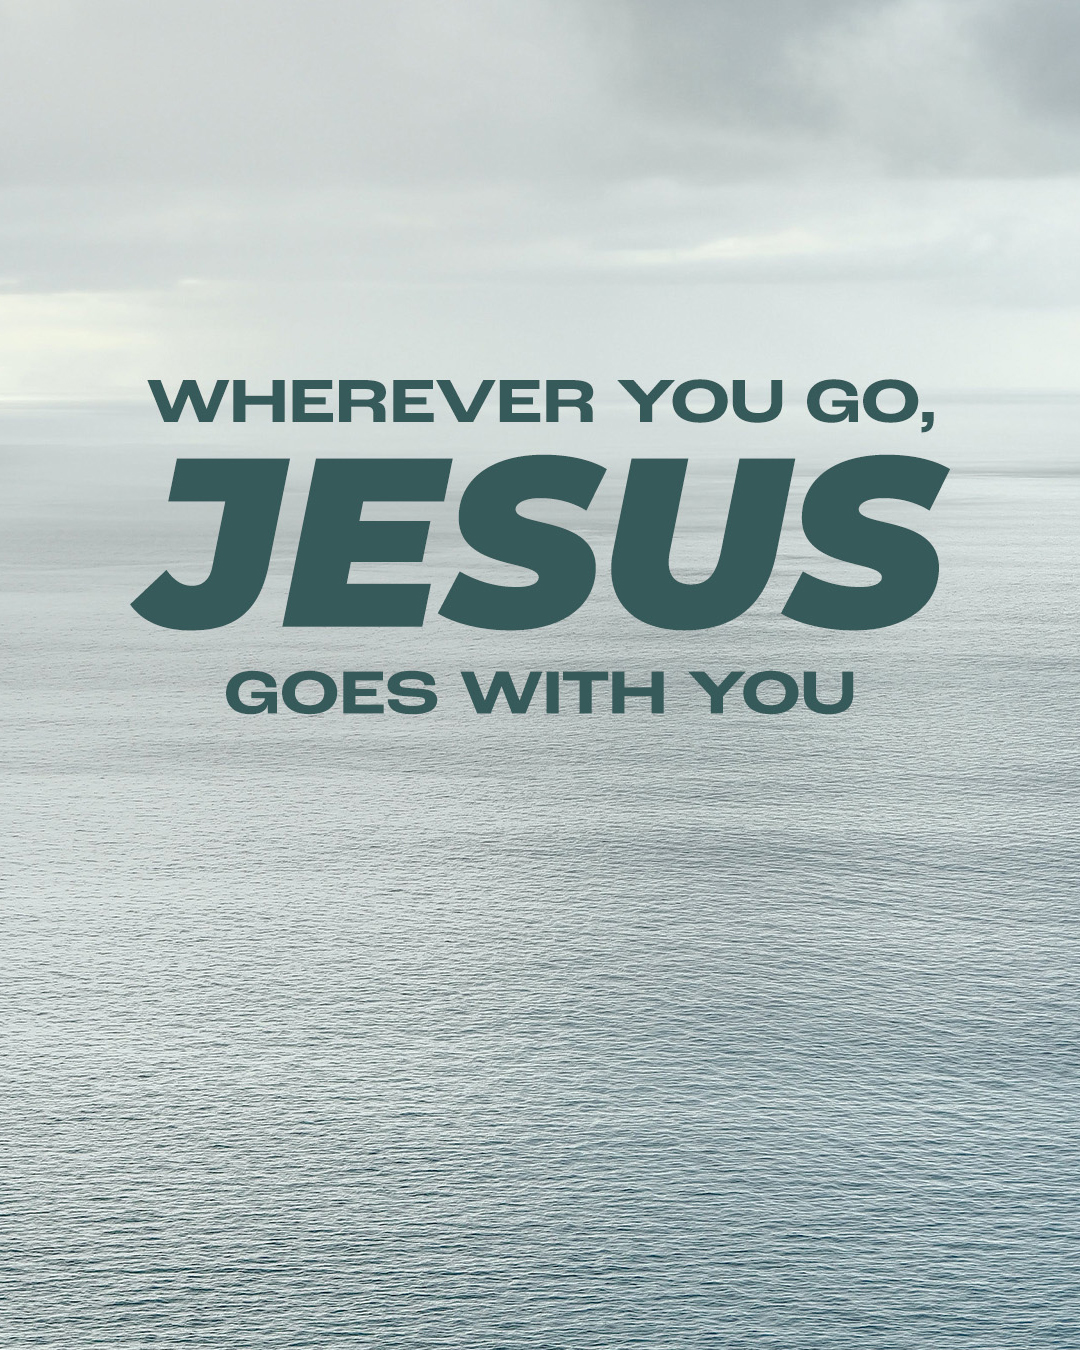 Wherever you go, Jesus goes with you